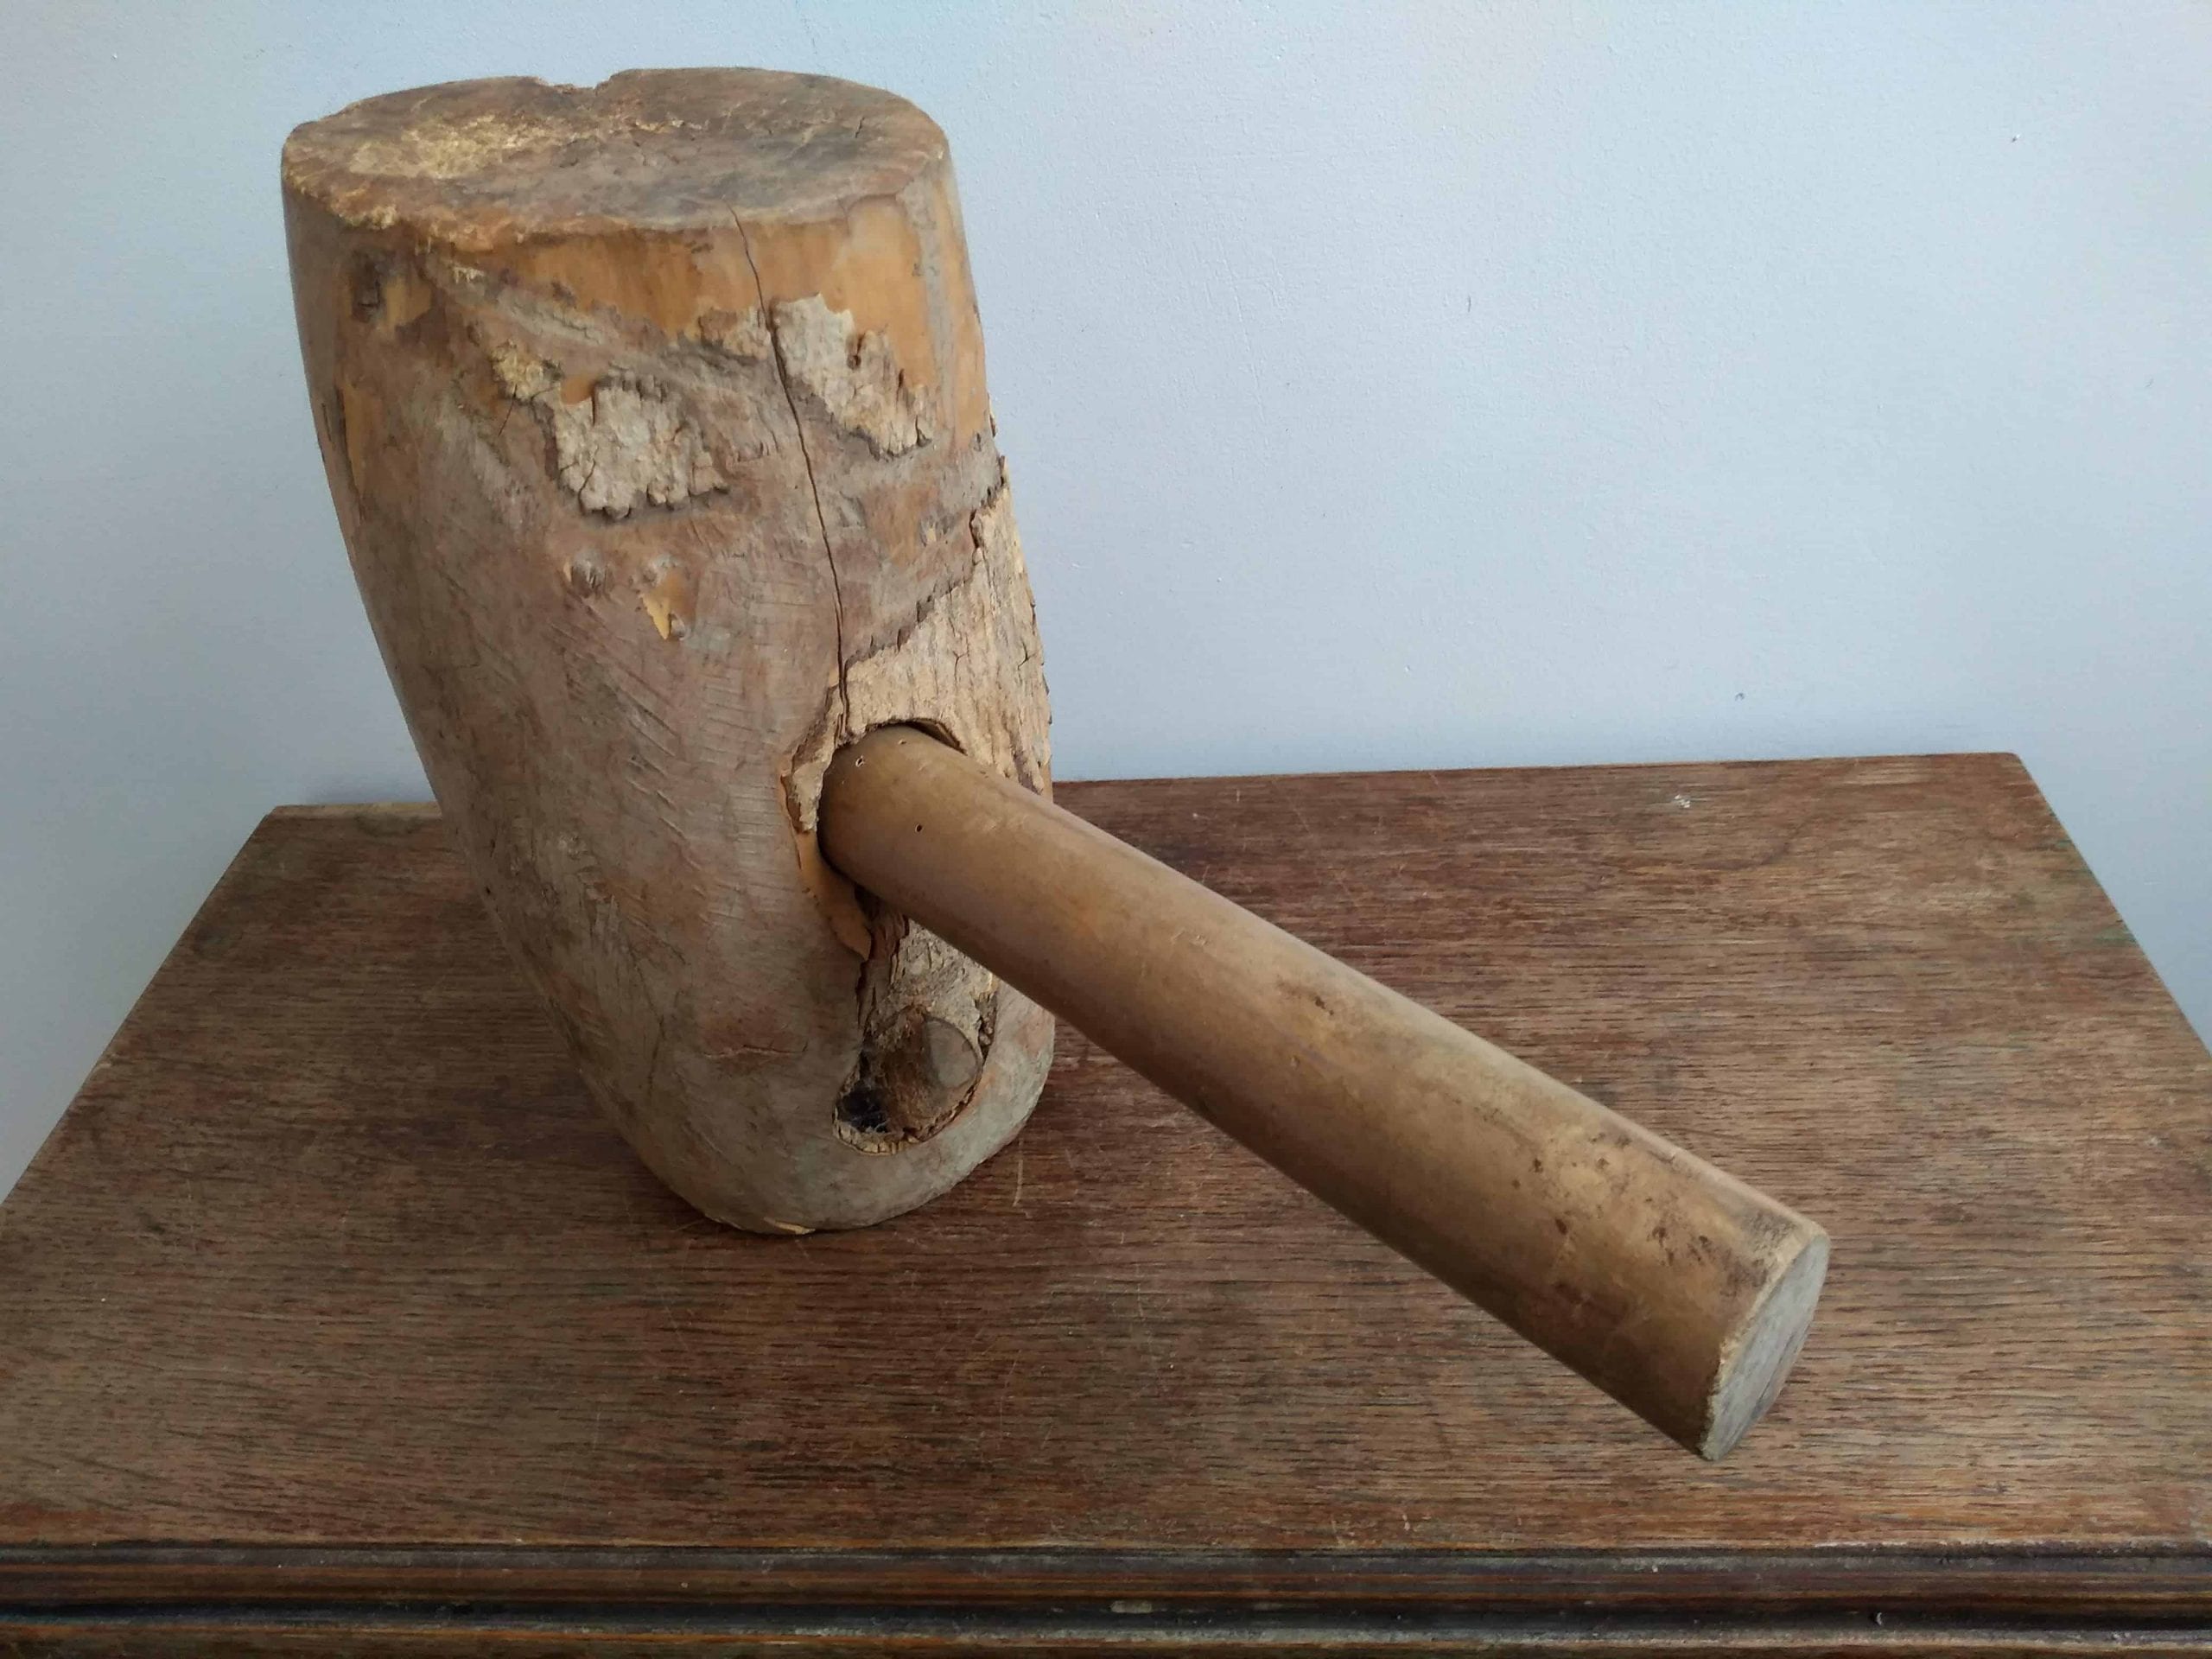 Antique Hand-Crafted Burl Wood Mallet 1800's 12L